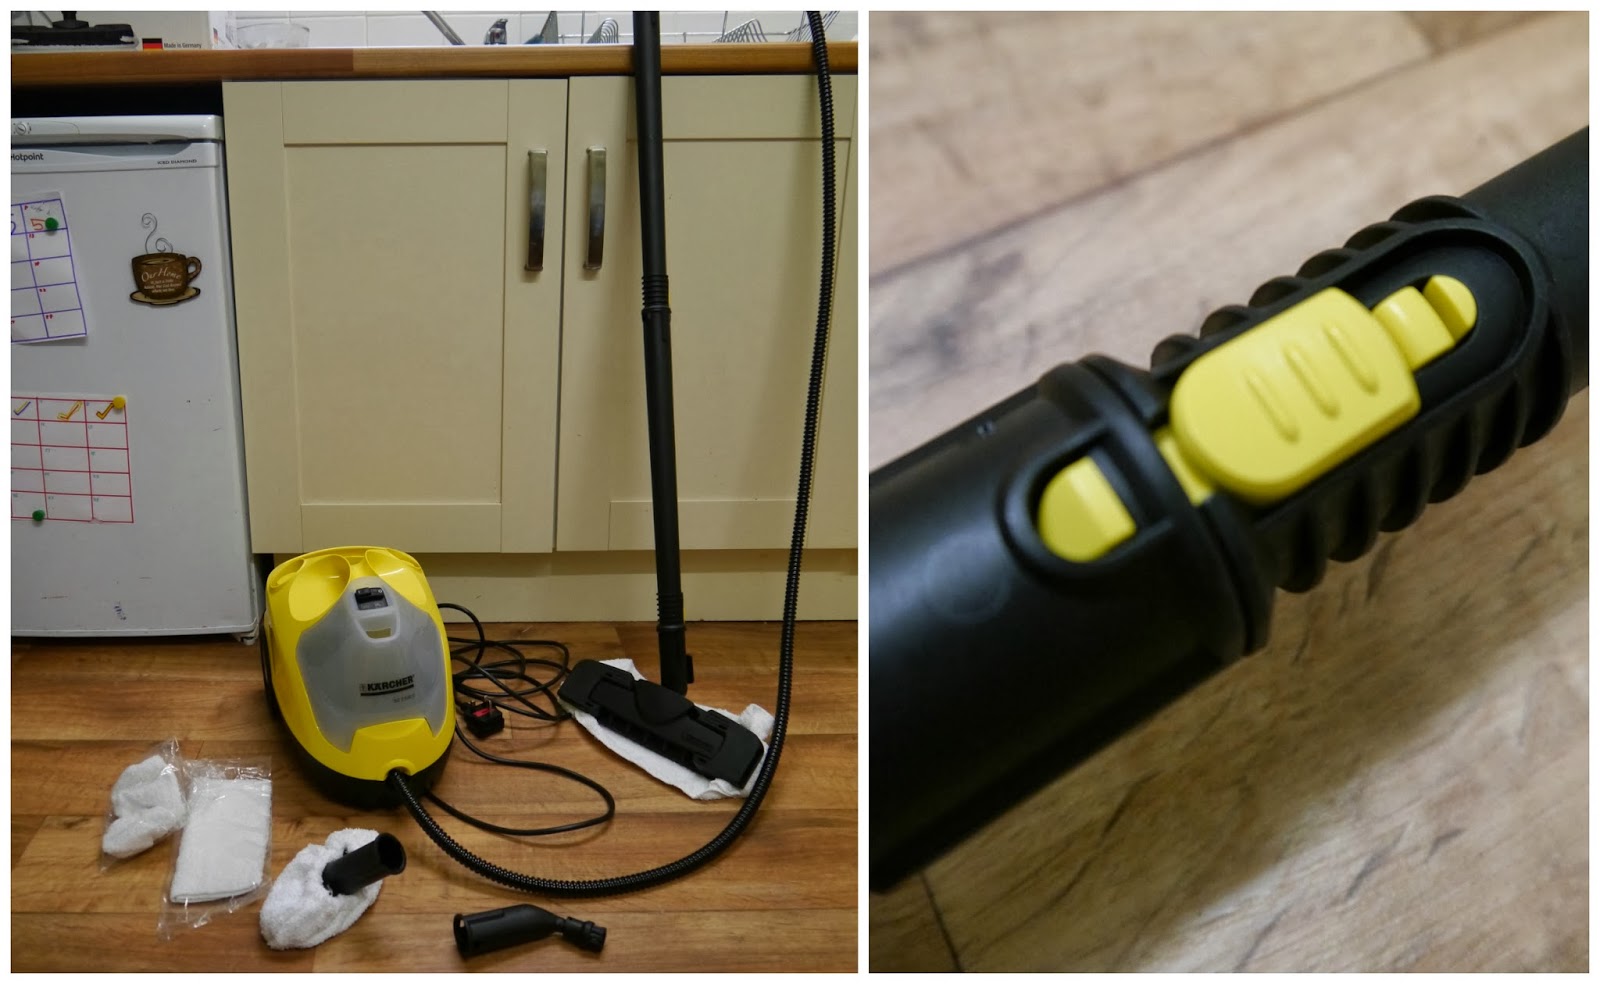 Spring Cleaning With a Steam Cleaner